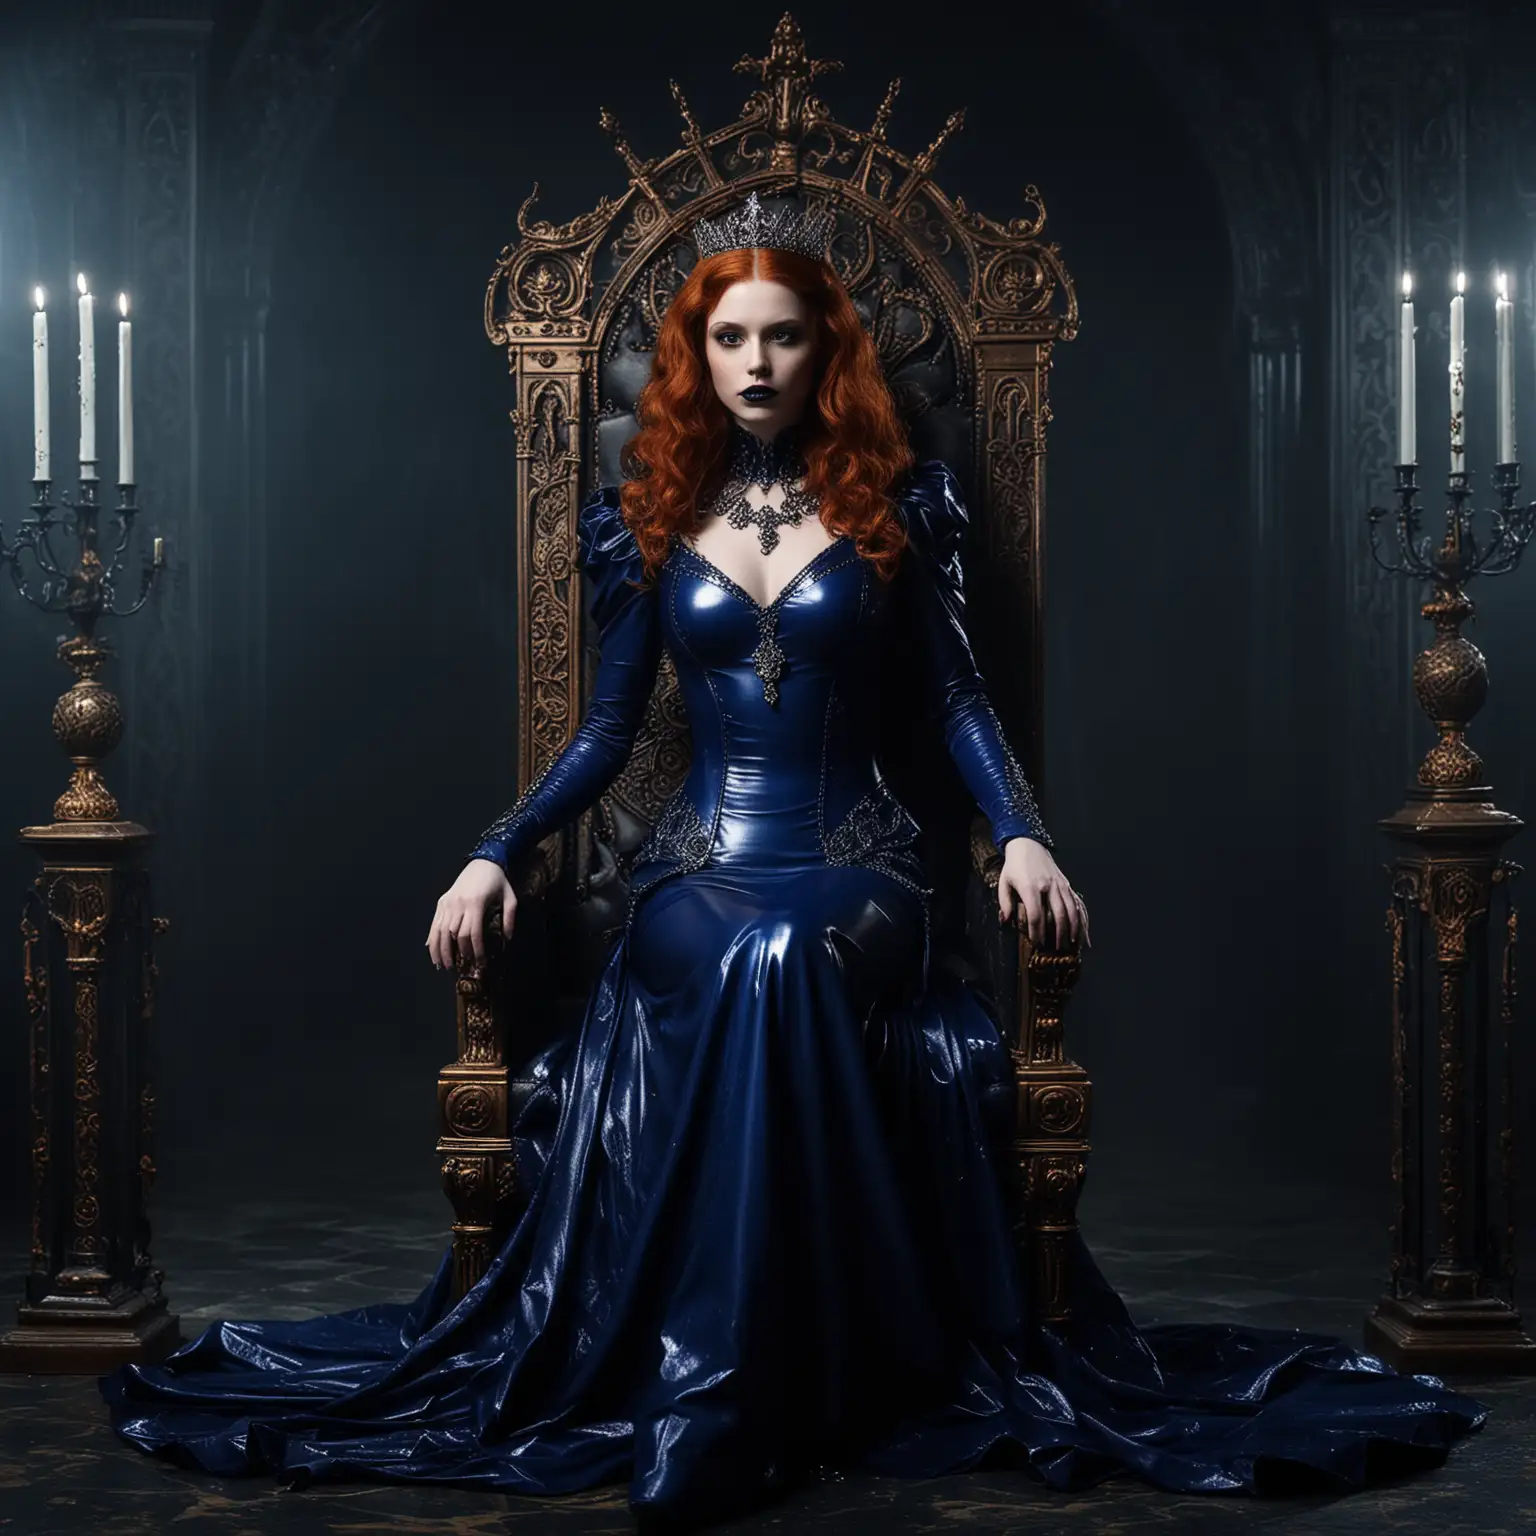 Dark Queen's Sinister Sovereignty:
Description Redhead, A latex dress in royal blue and with royal ornaments, inspired by an evil queen from a dark fairytale realm. The model has a regal posture and piercing gaze, similar to a dark queen, and poses in front of a dark throne background with sparkling crowns and eerie shadows.
